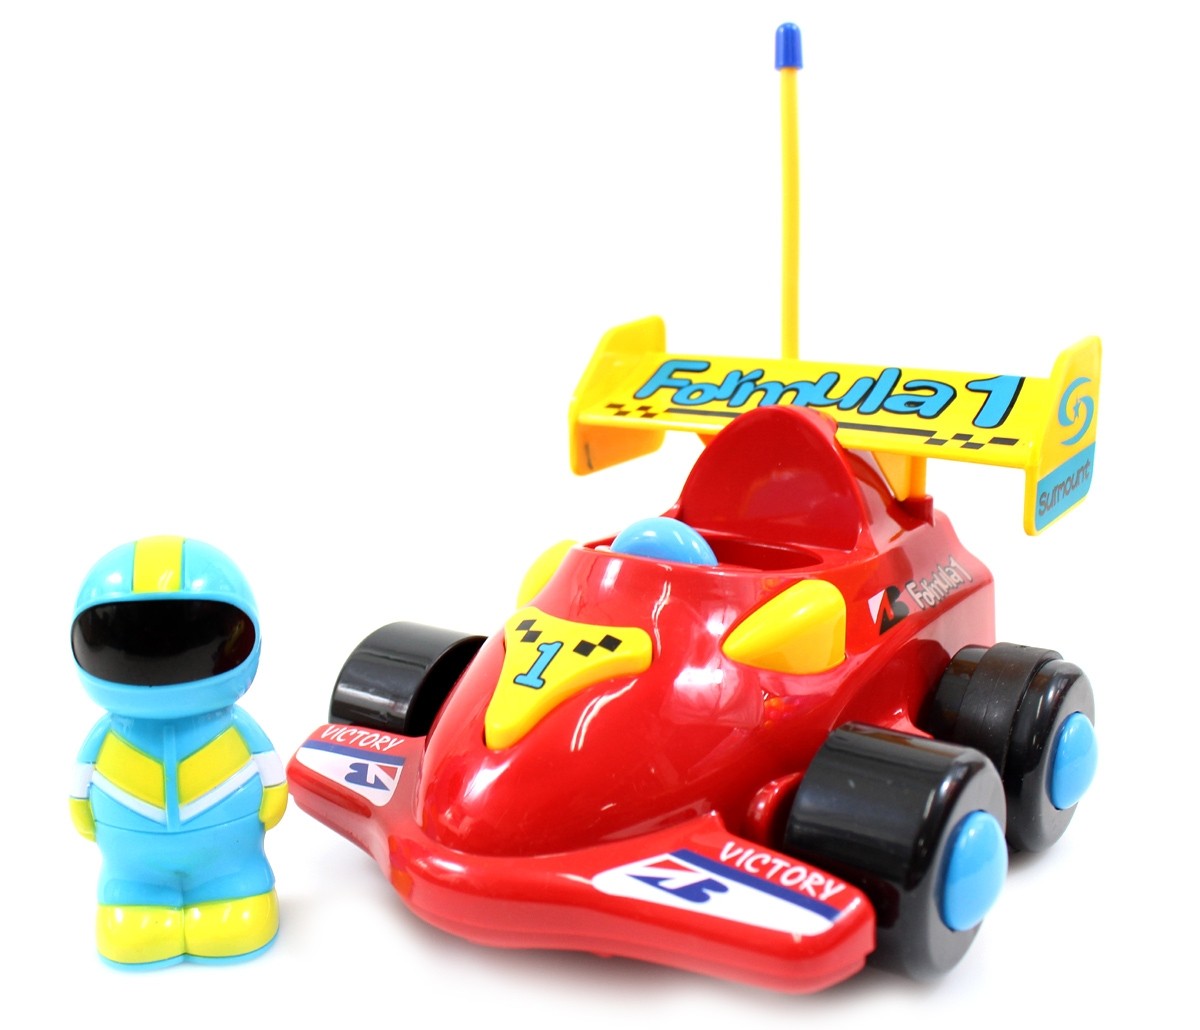 4" Cartoon RC Formula Race Car Remote Control Toy For Toddlers (Red)